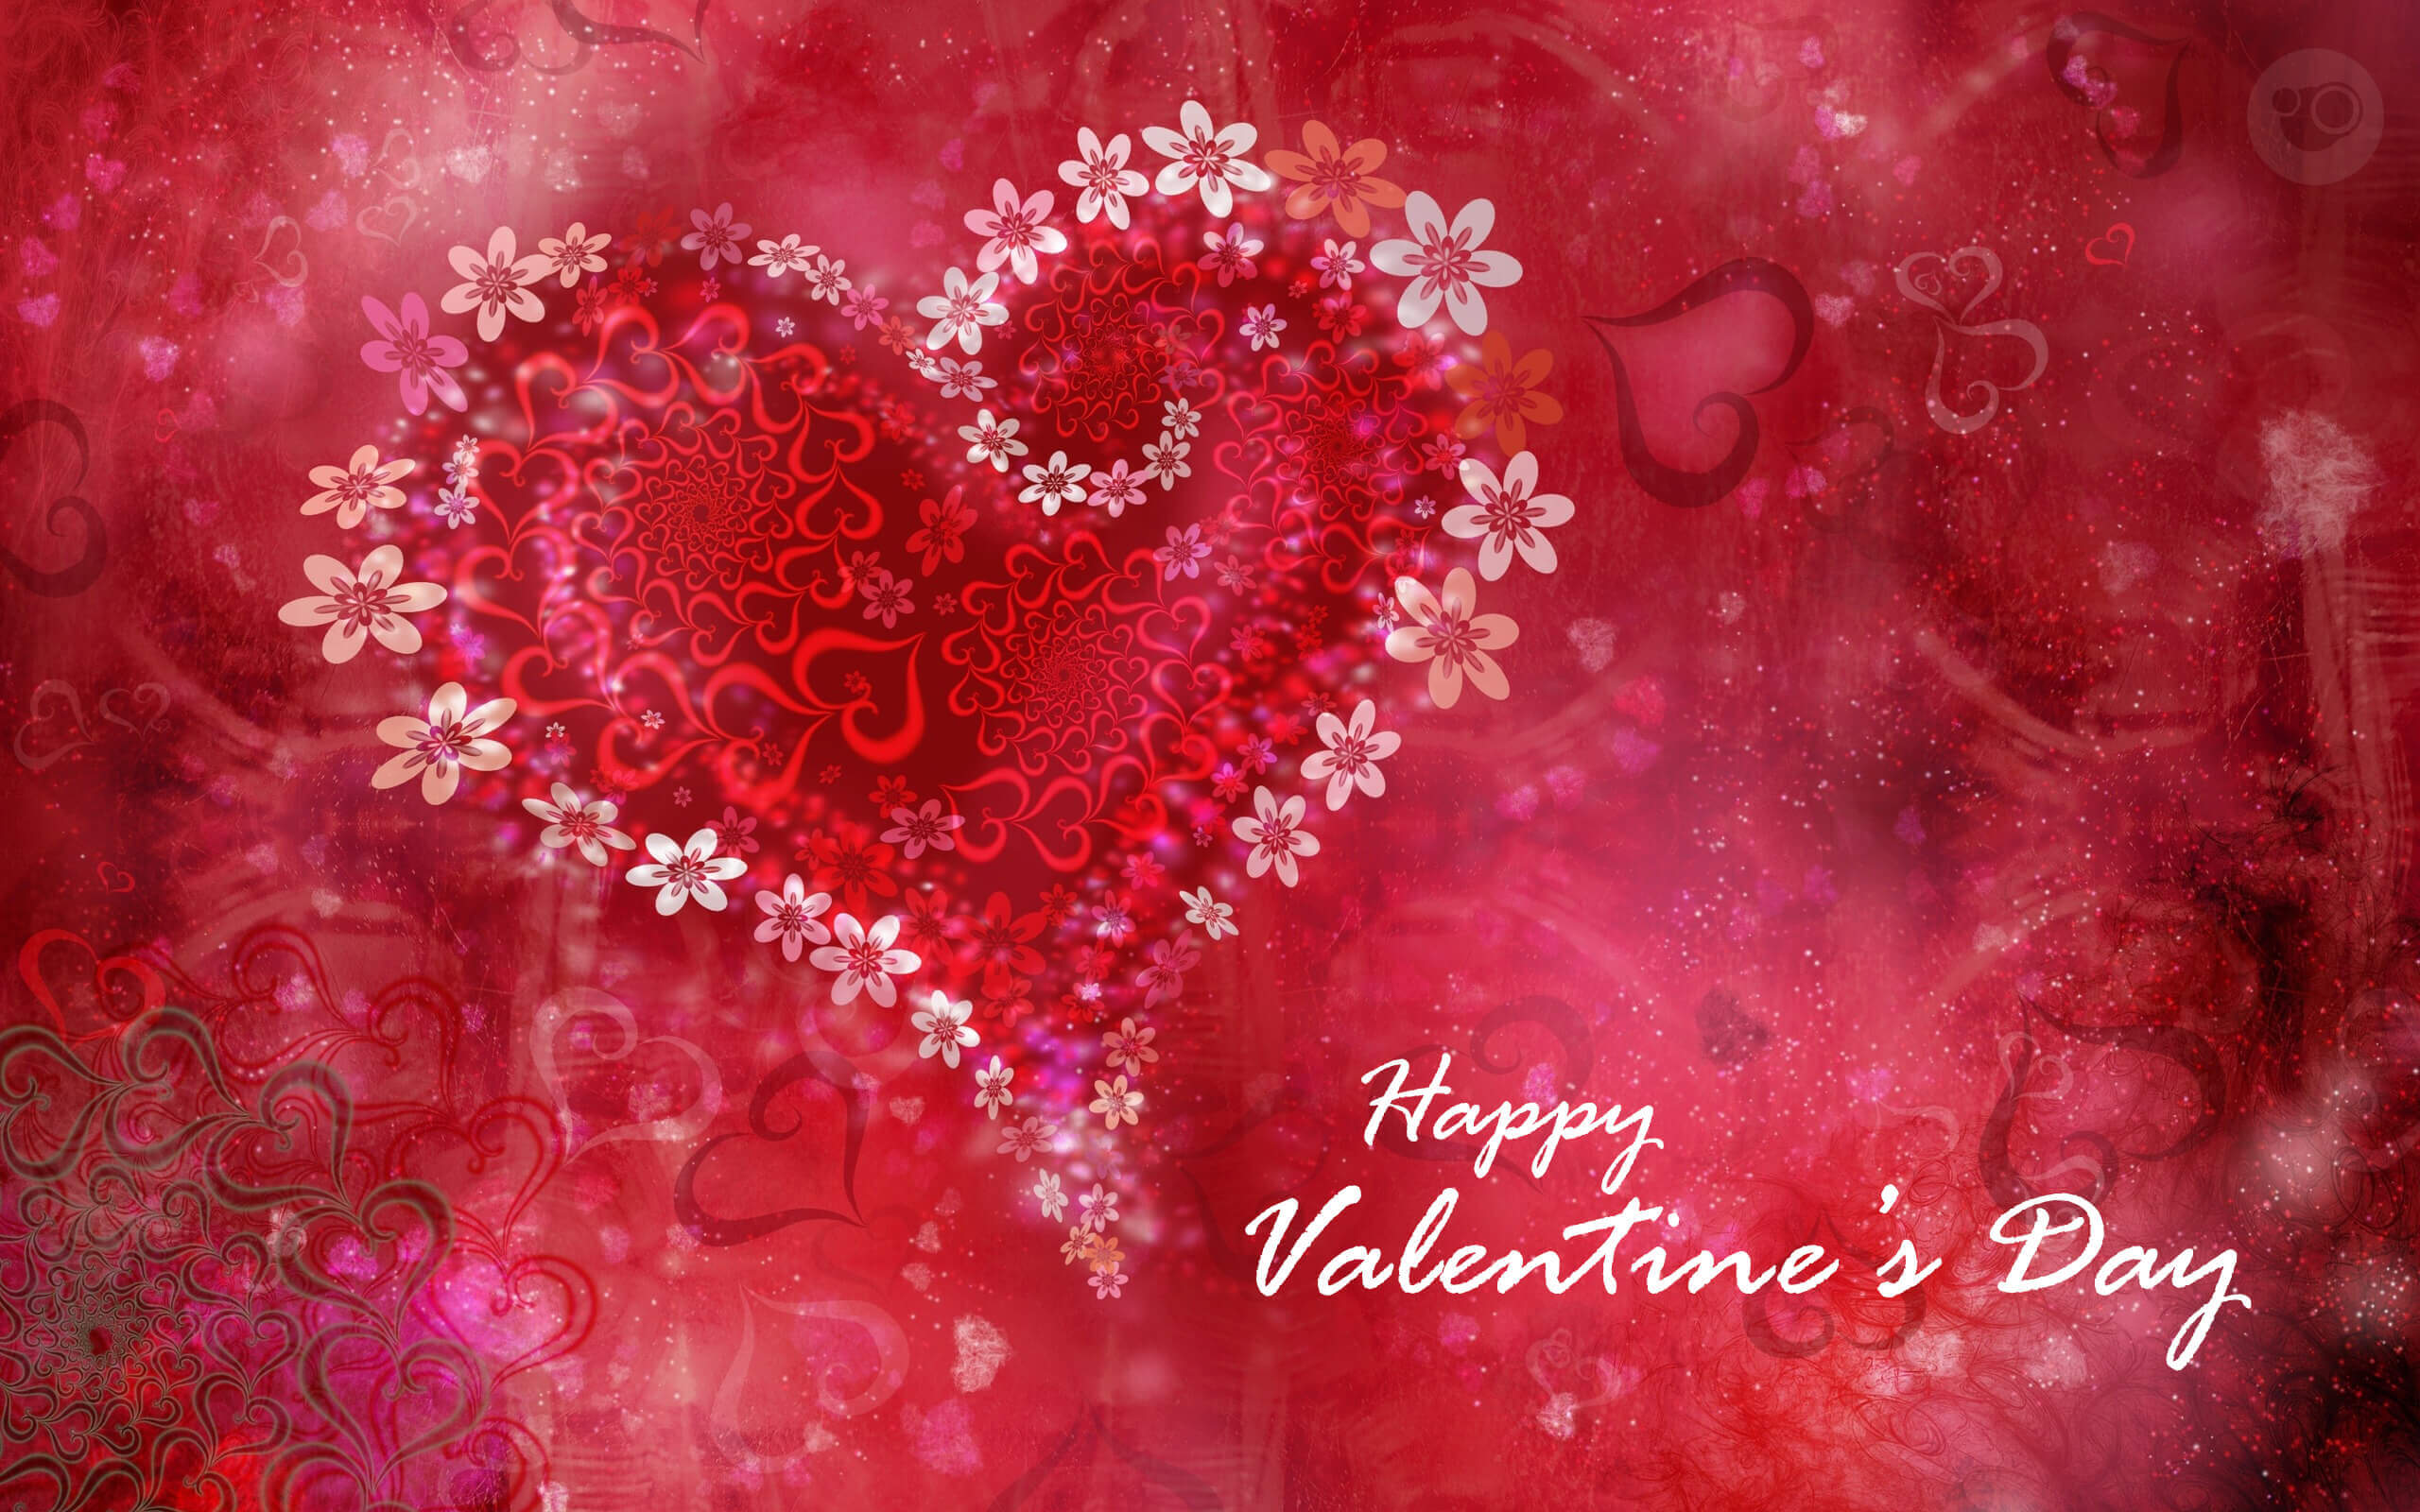 happy-valentines-day-hd-wallpapers-free-download-2